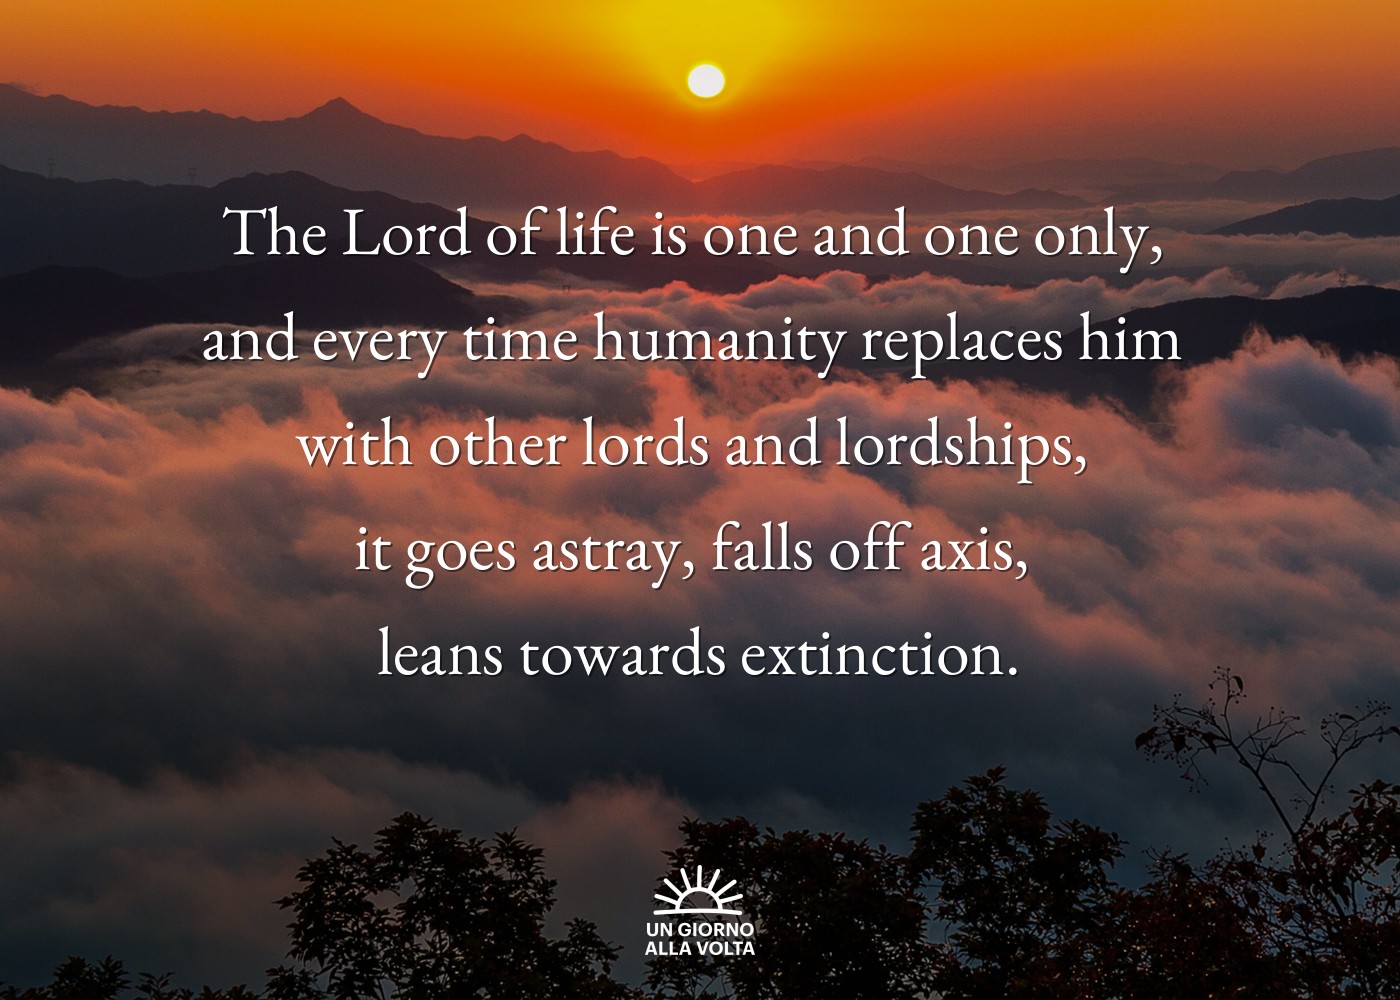 The Lord of life is one and one only, 
and every time humanity replaces him 
with other lords and lordships, 
it goes astray, falls off axis, 
leans towards extinction.
